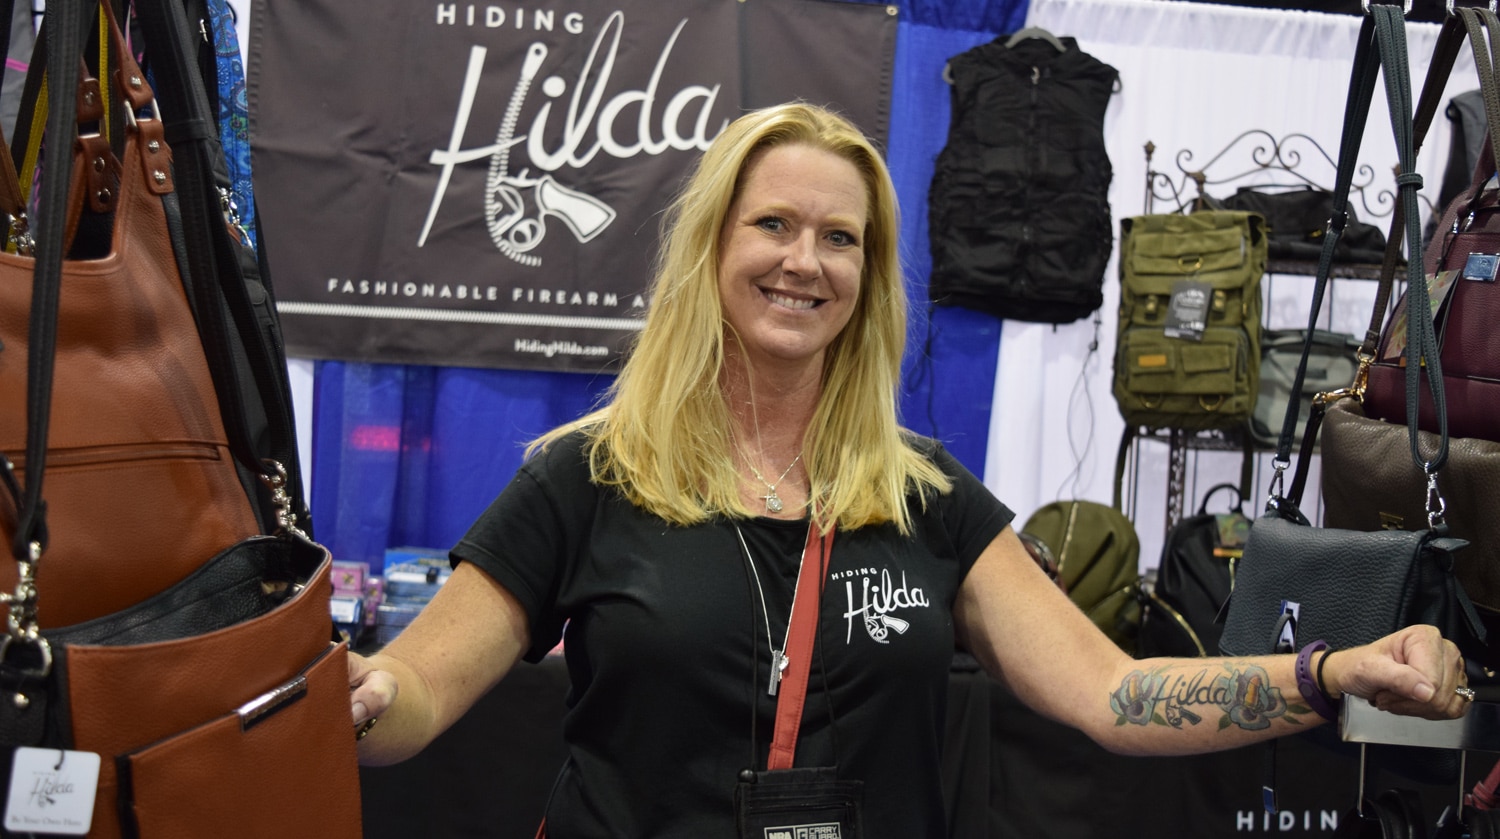 Dawn Hillyer, president of Hiding Hilda, is so proud of her concealed carry purse company she got the name tattooed on her forearm. (Photo: Daniel Terrill/Guns.com)